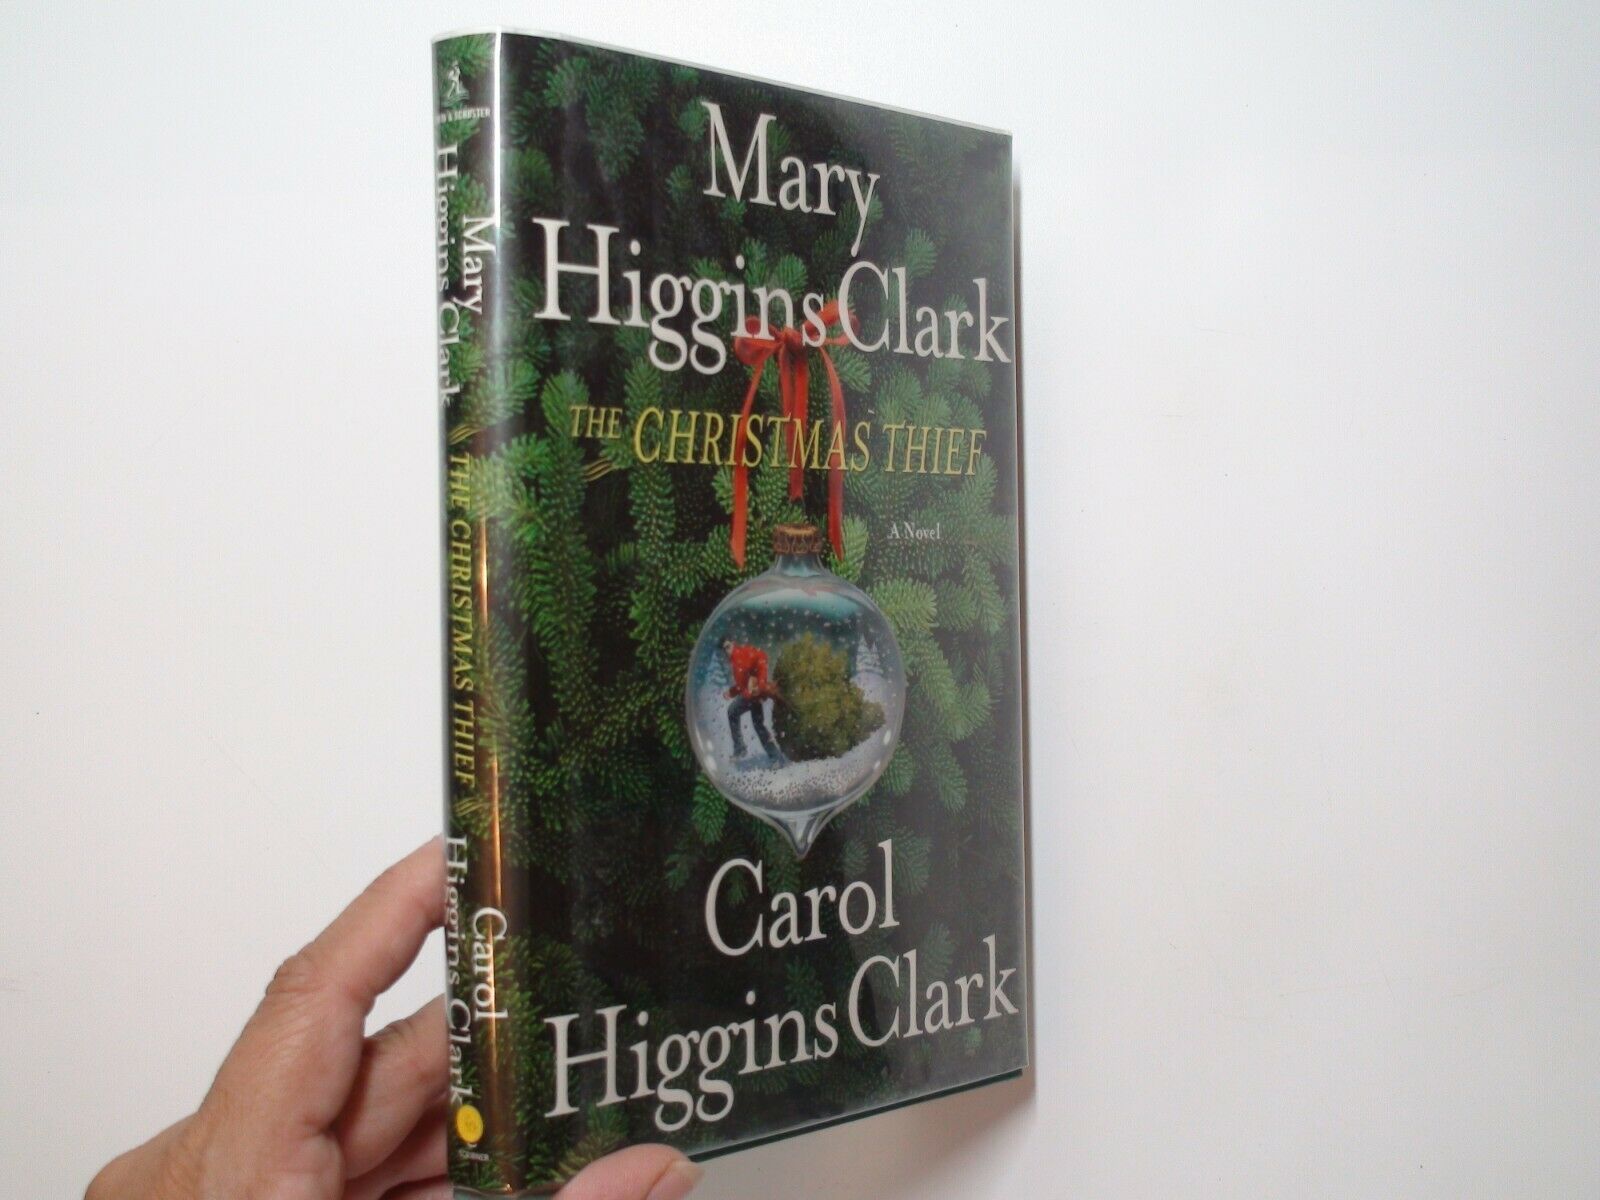 The Christmas Thief, SIGNED by Mary Higgins Clark and Carol Higgins Clark, 2004